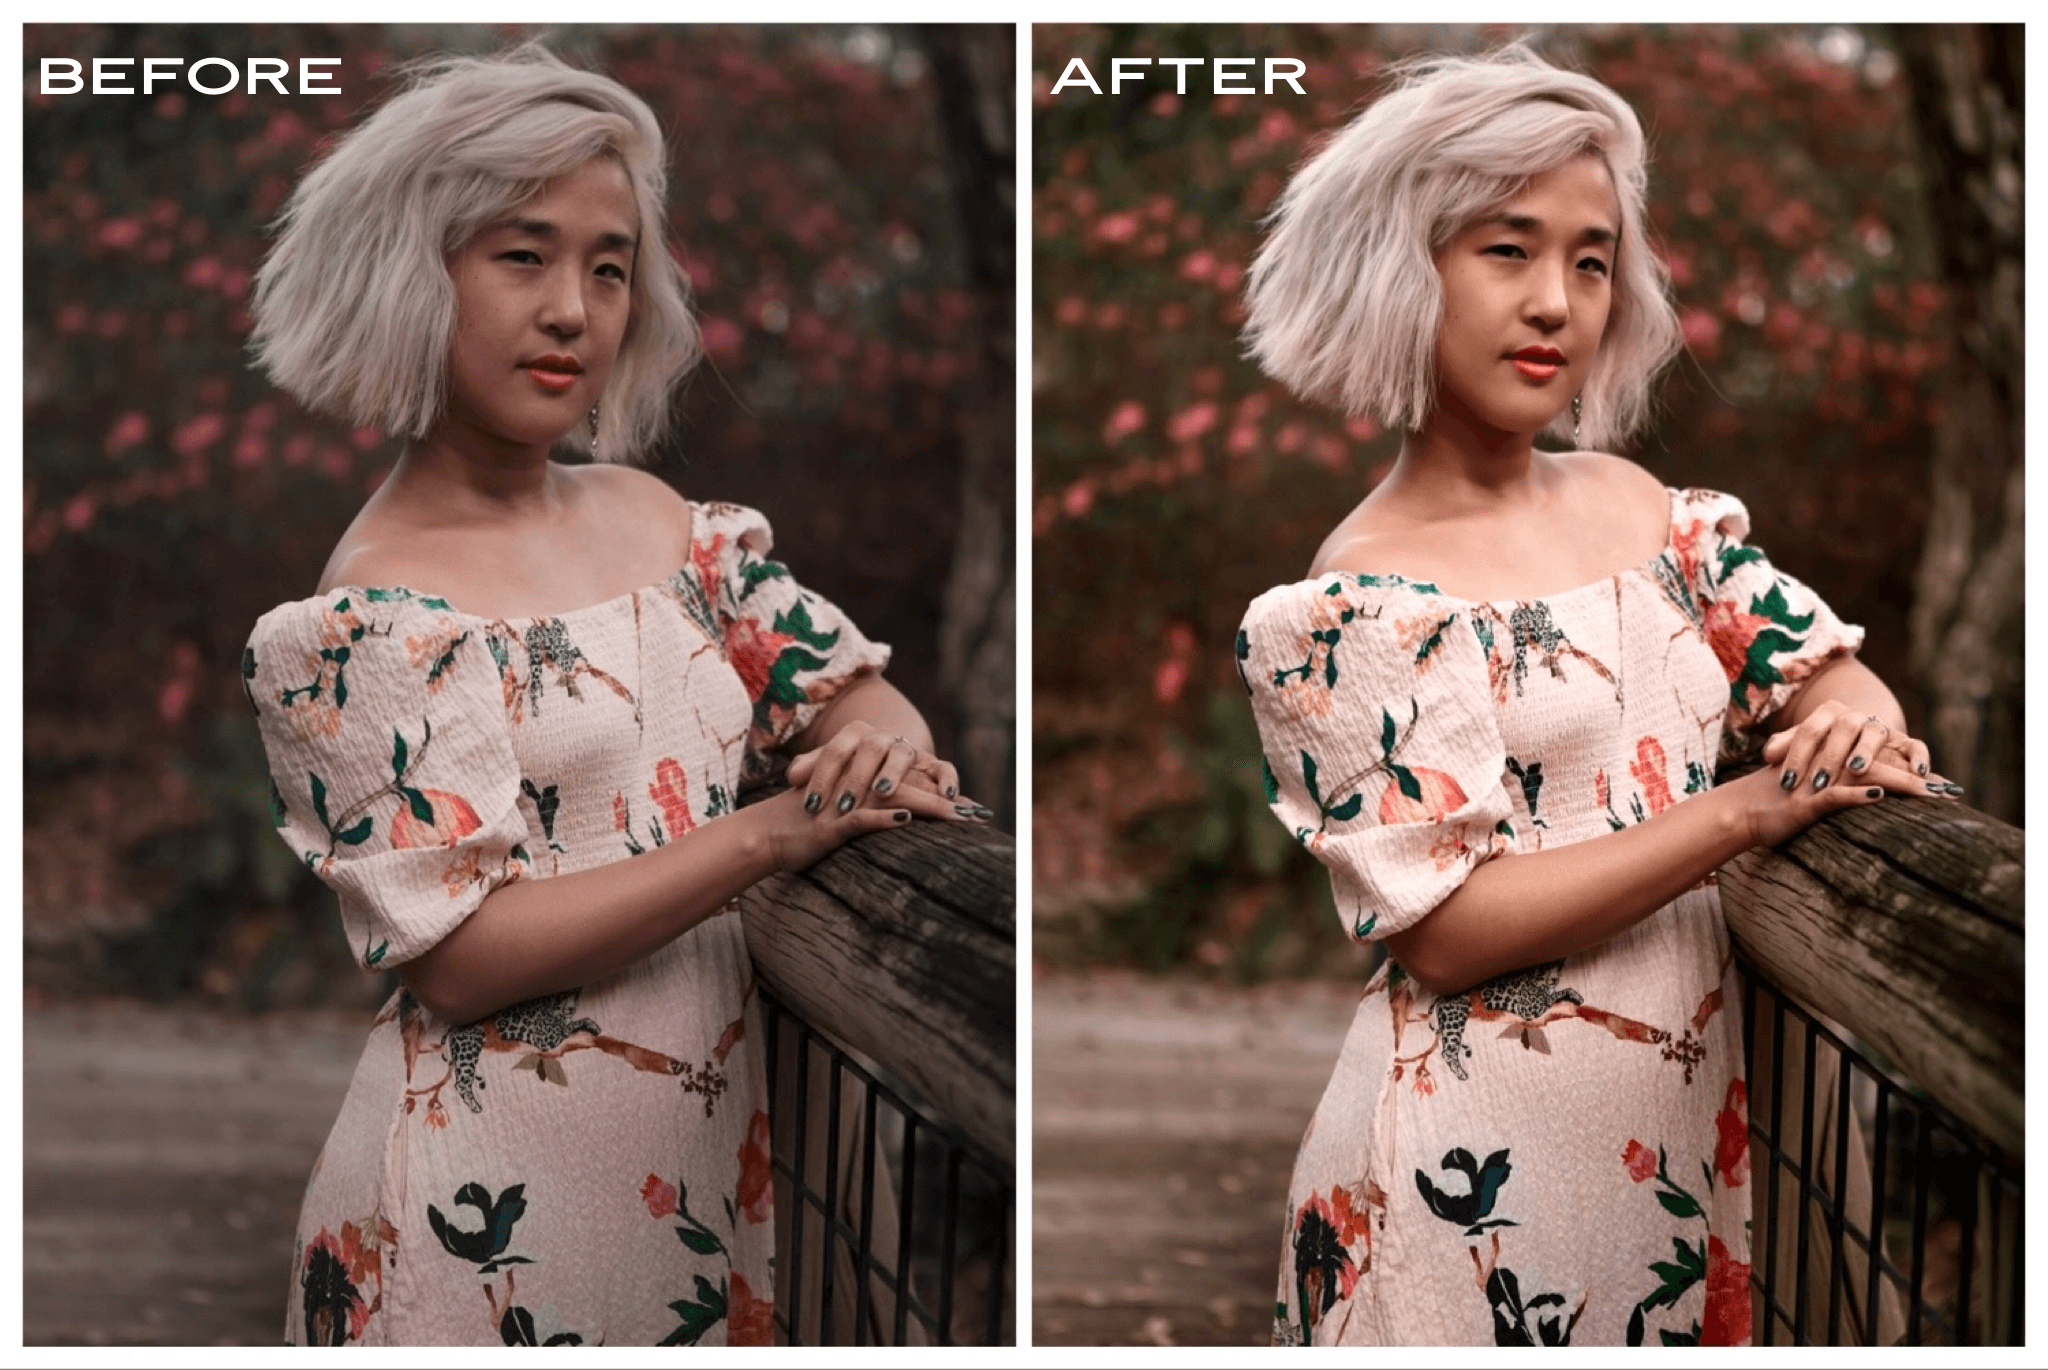 Comparison image showing a woman before and after photo editing, standing by a fence with autumn leaves